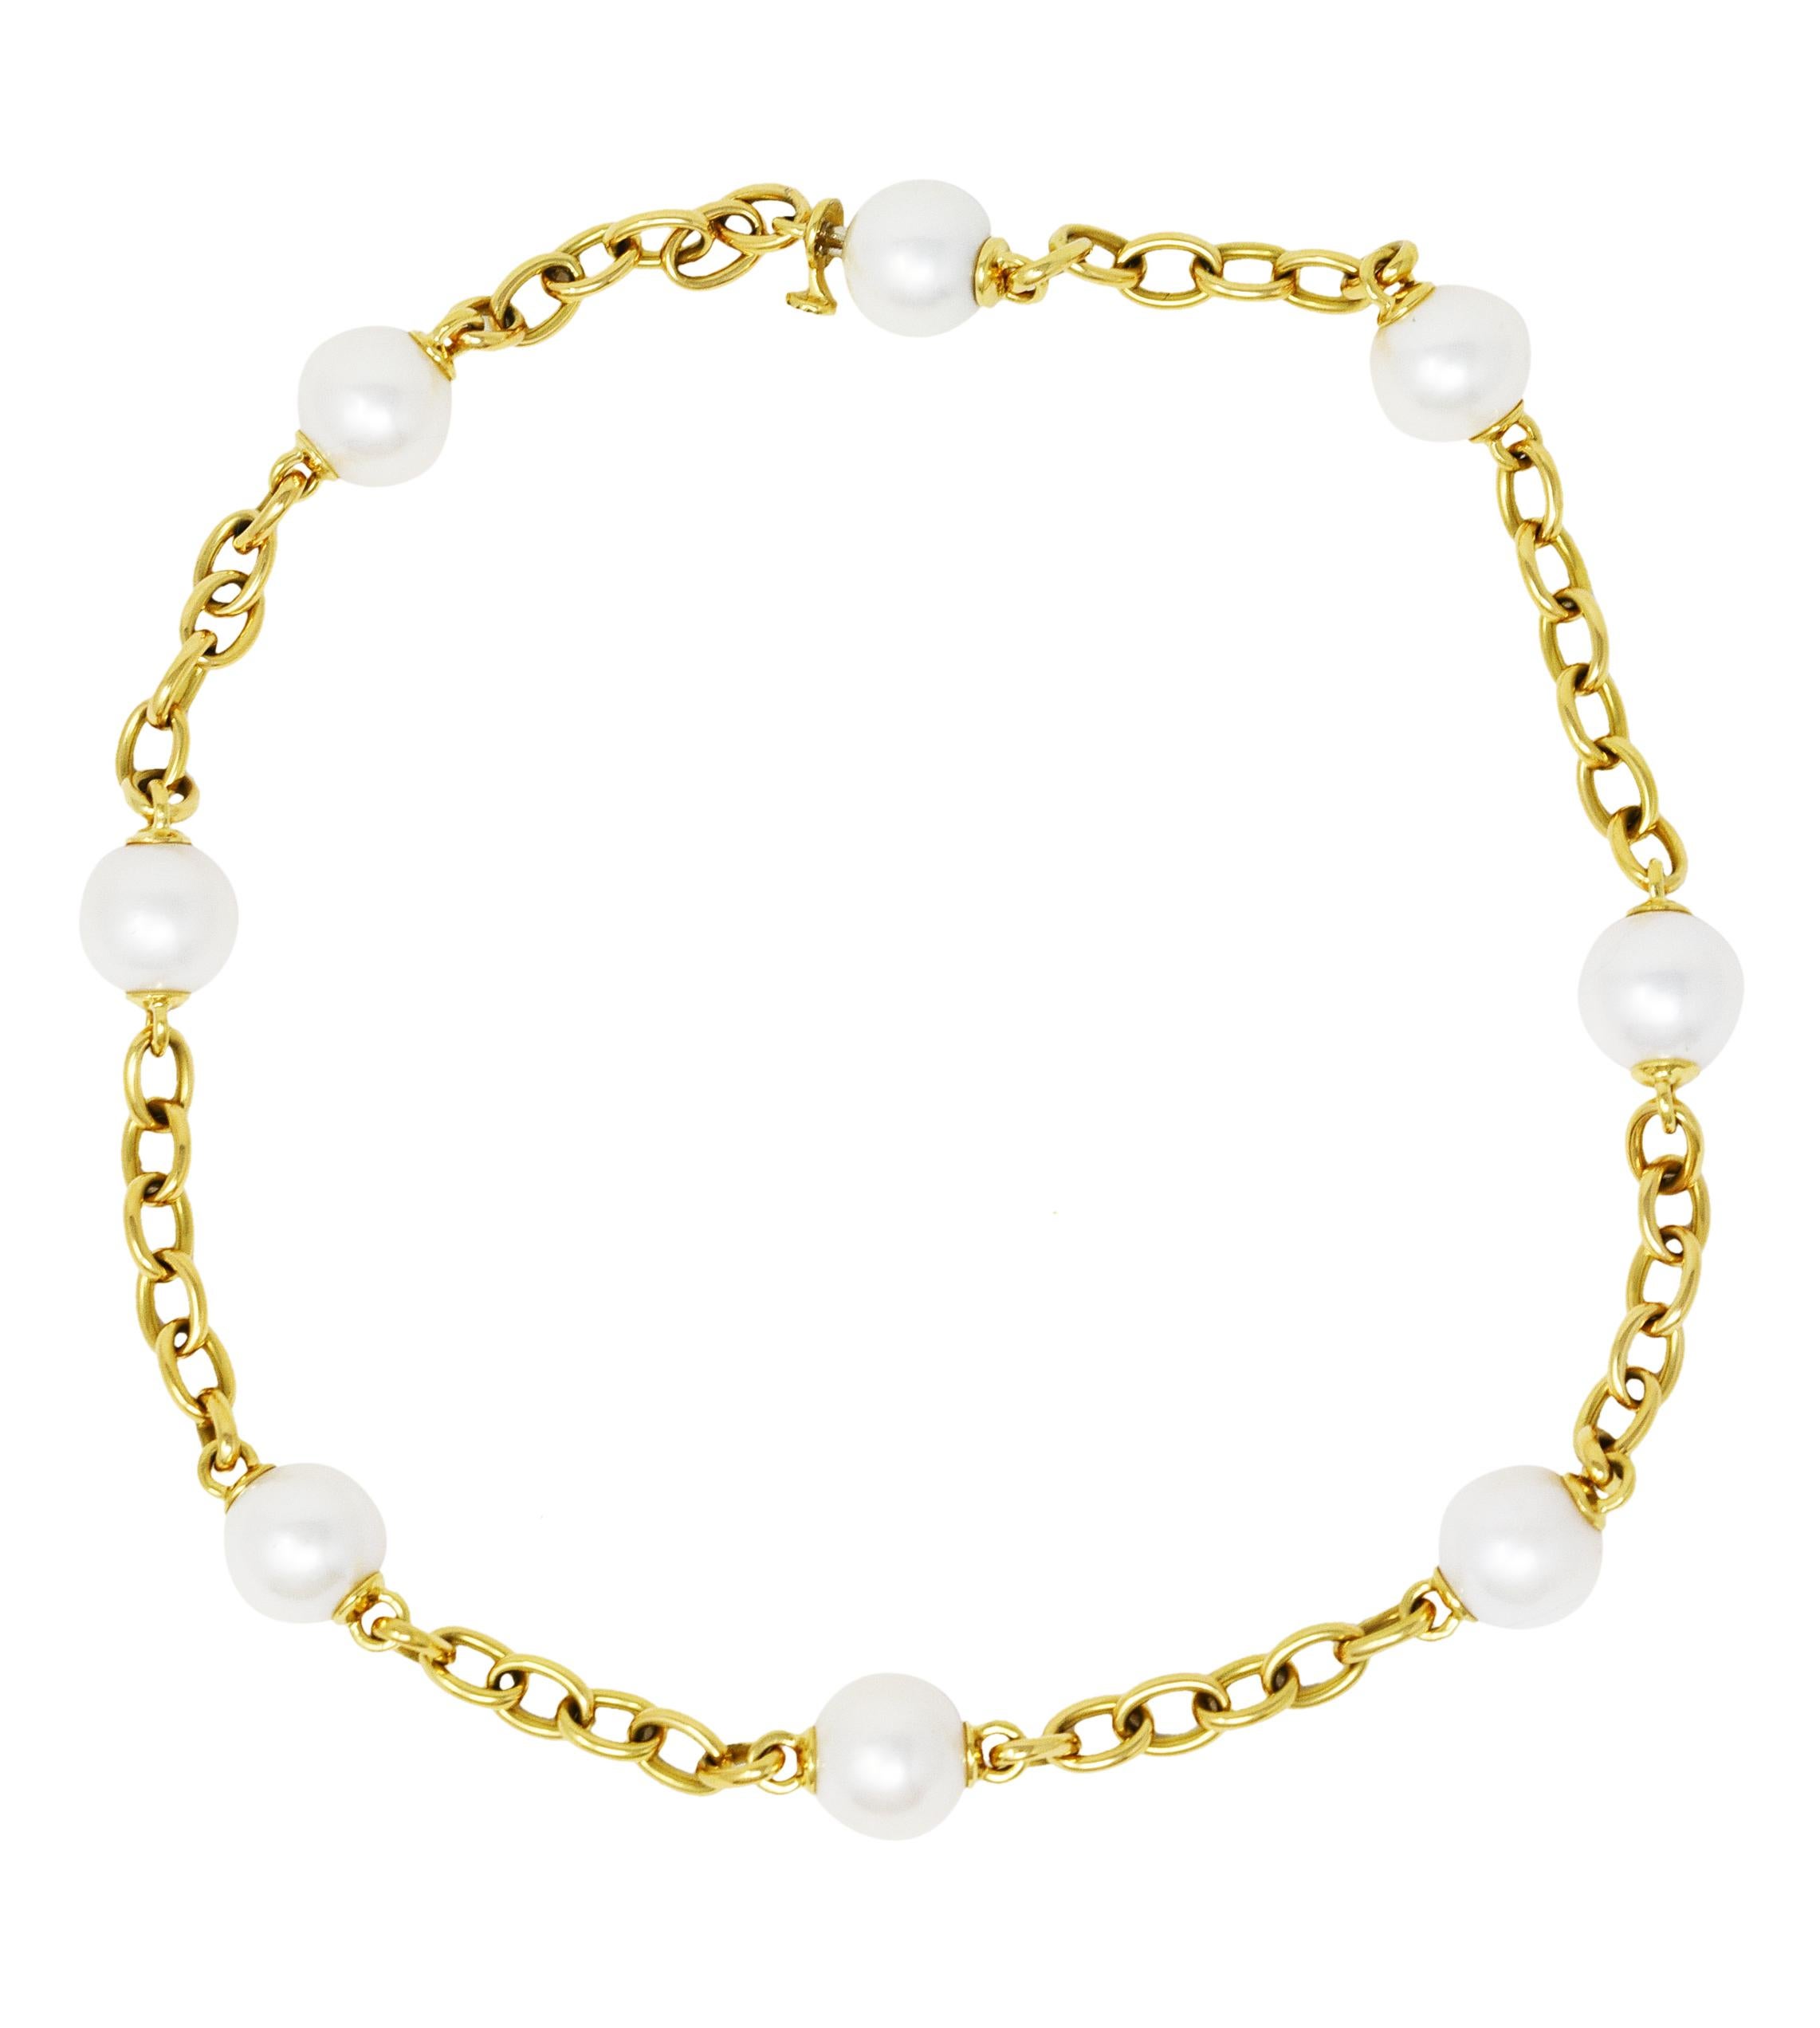 Necklace is designed as a cable chain necklace with eight 12.0 mm round South Sea pearl bead stations

White in body color with iridescence and good luster

Completed by hidden barrel clasp closure

Stamped 750 for 18 karat gold

With serial number